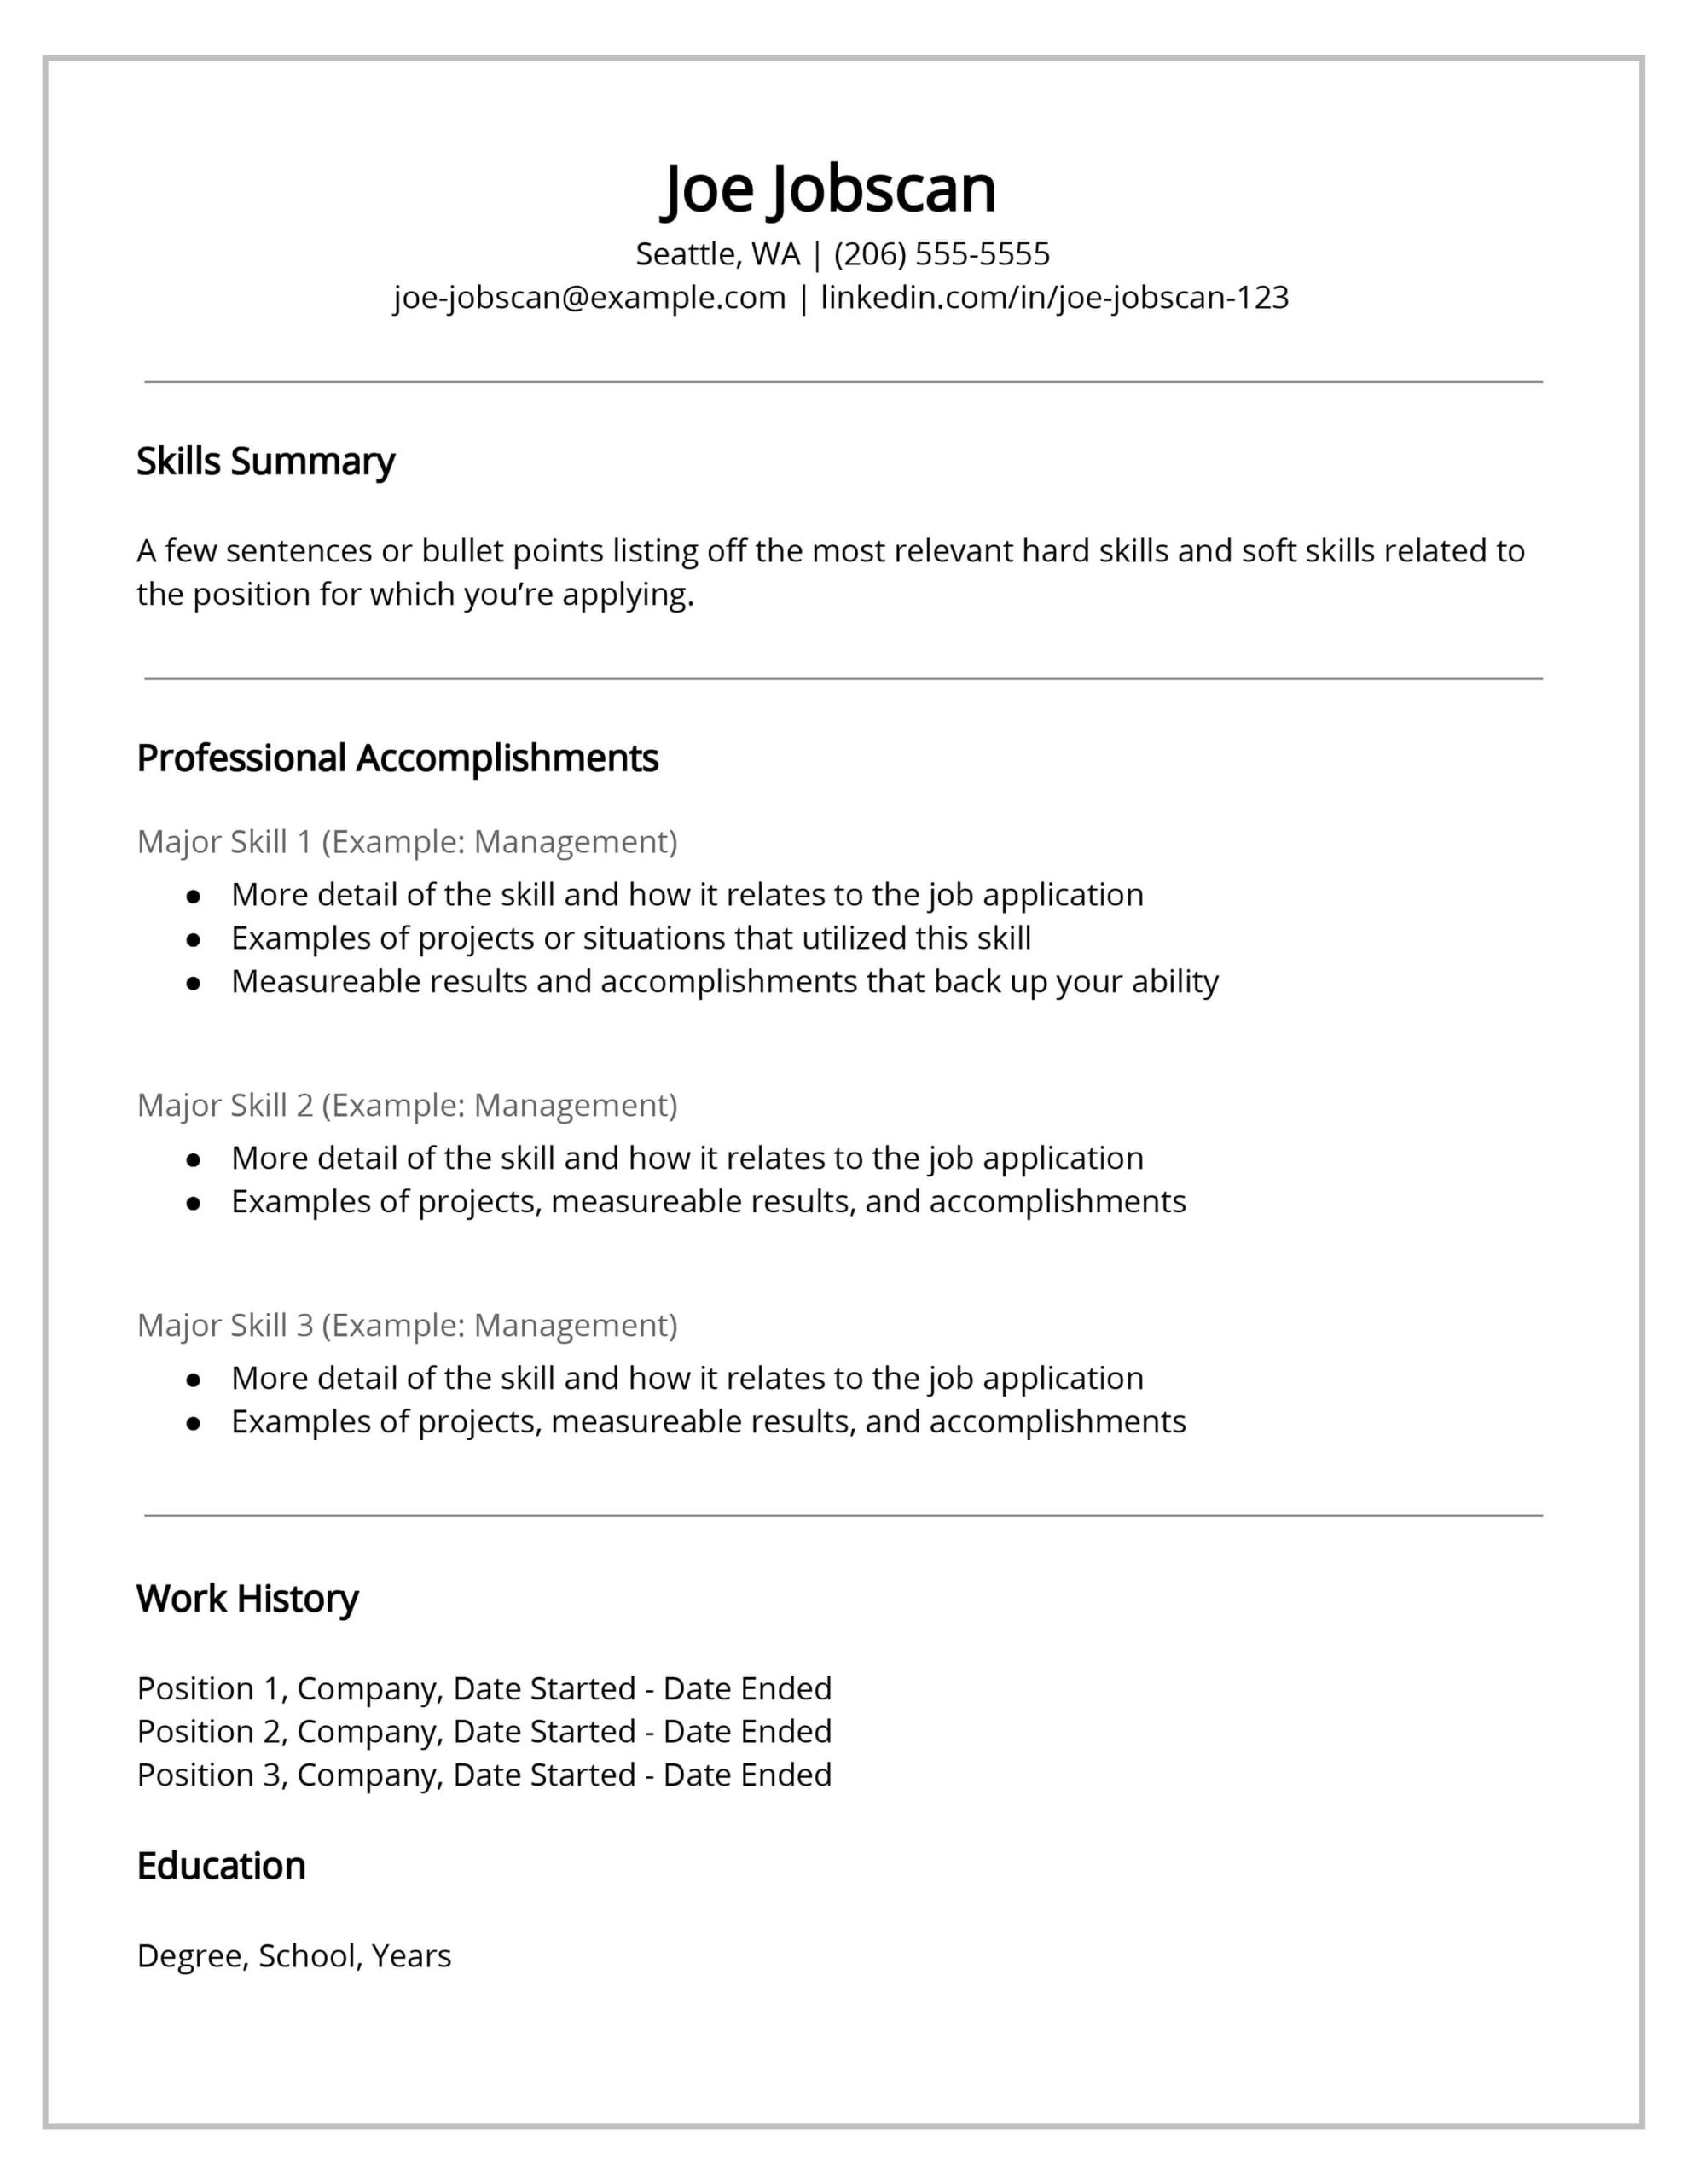 Sample Skills and Abilities for Resumes Recruiters Hate the Functional Resume formatâdo This Instead